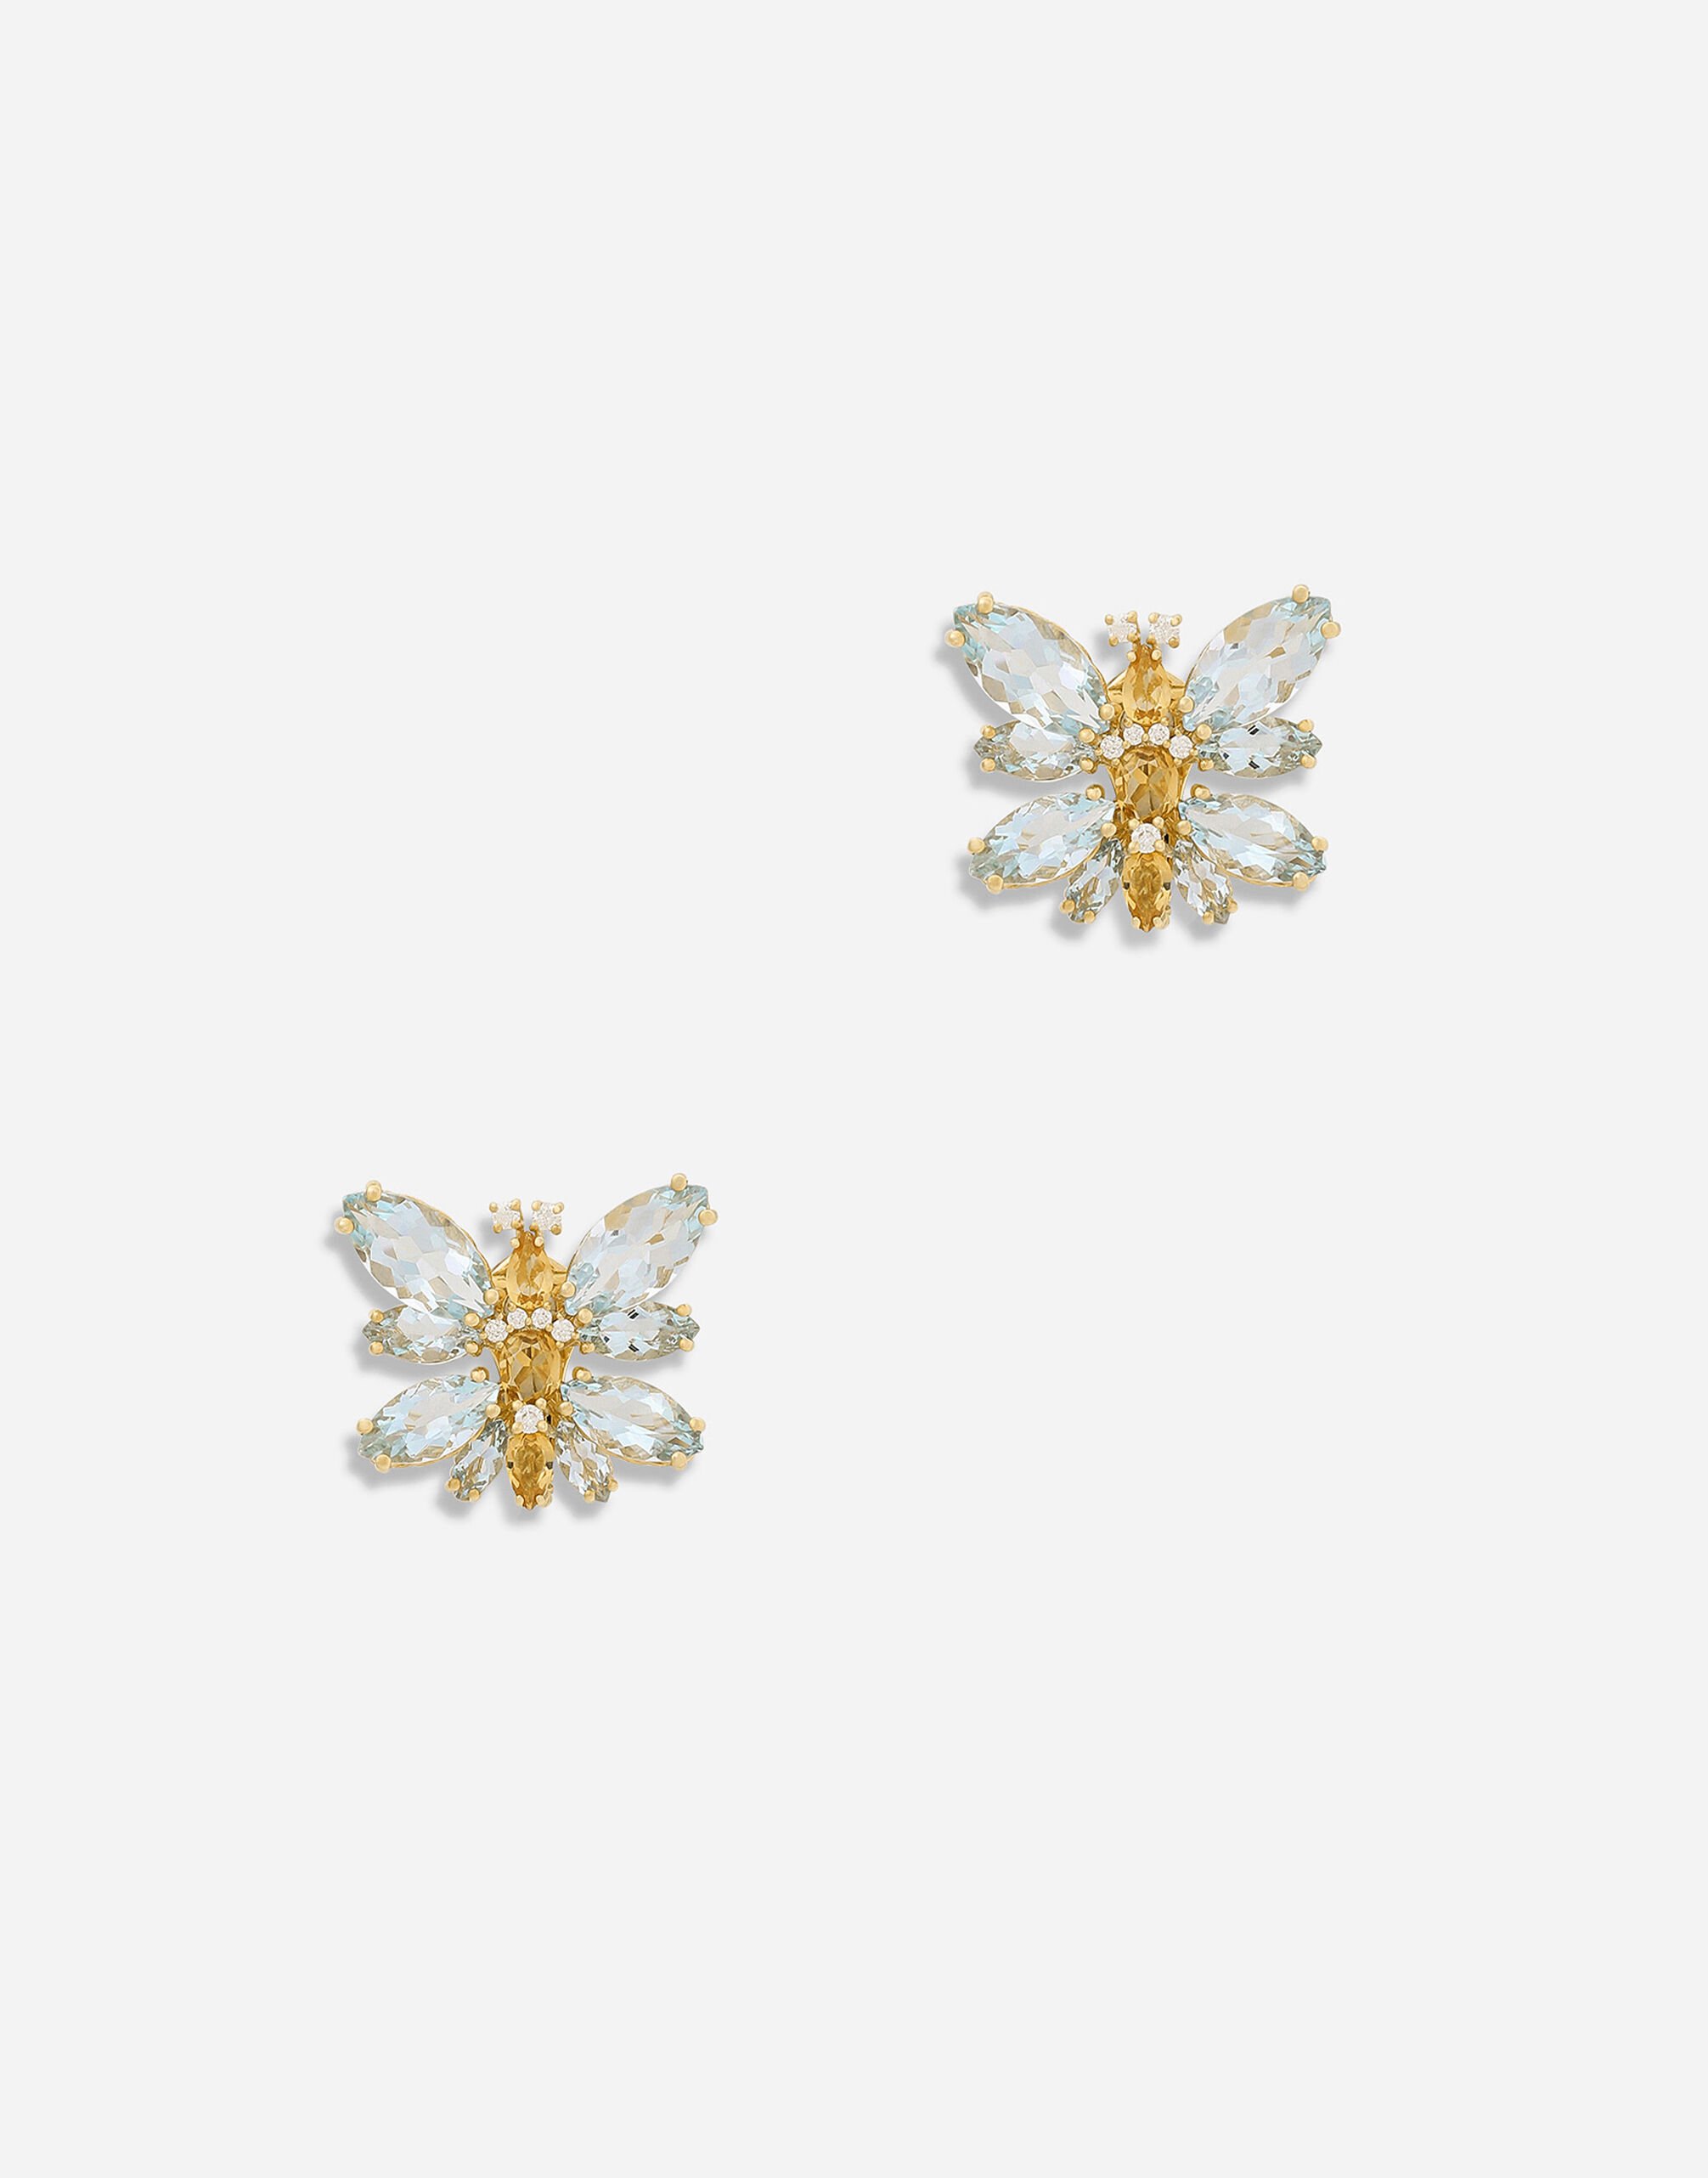 Dolce & Gabbana Spring earrings in yellow 18kt gold with aquamarine butterfly Gold WEQA2GWPE01